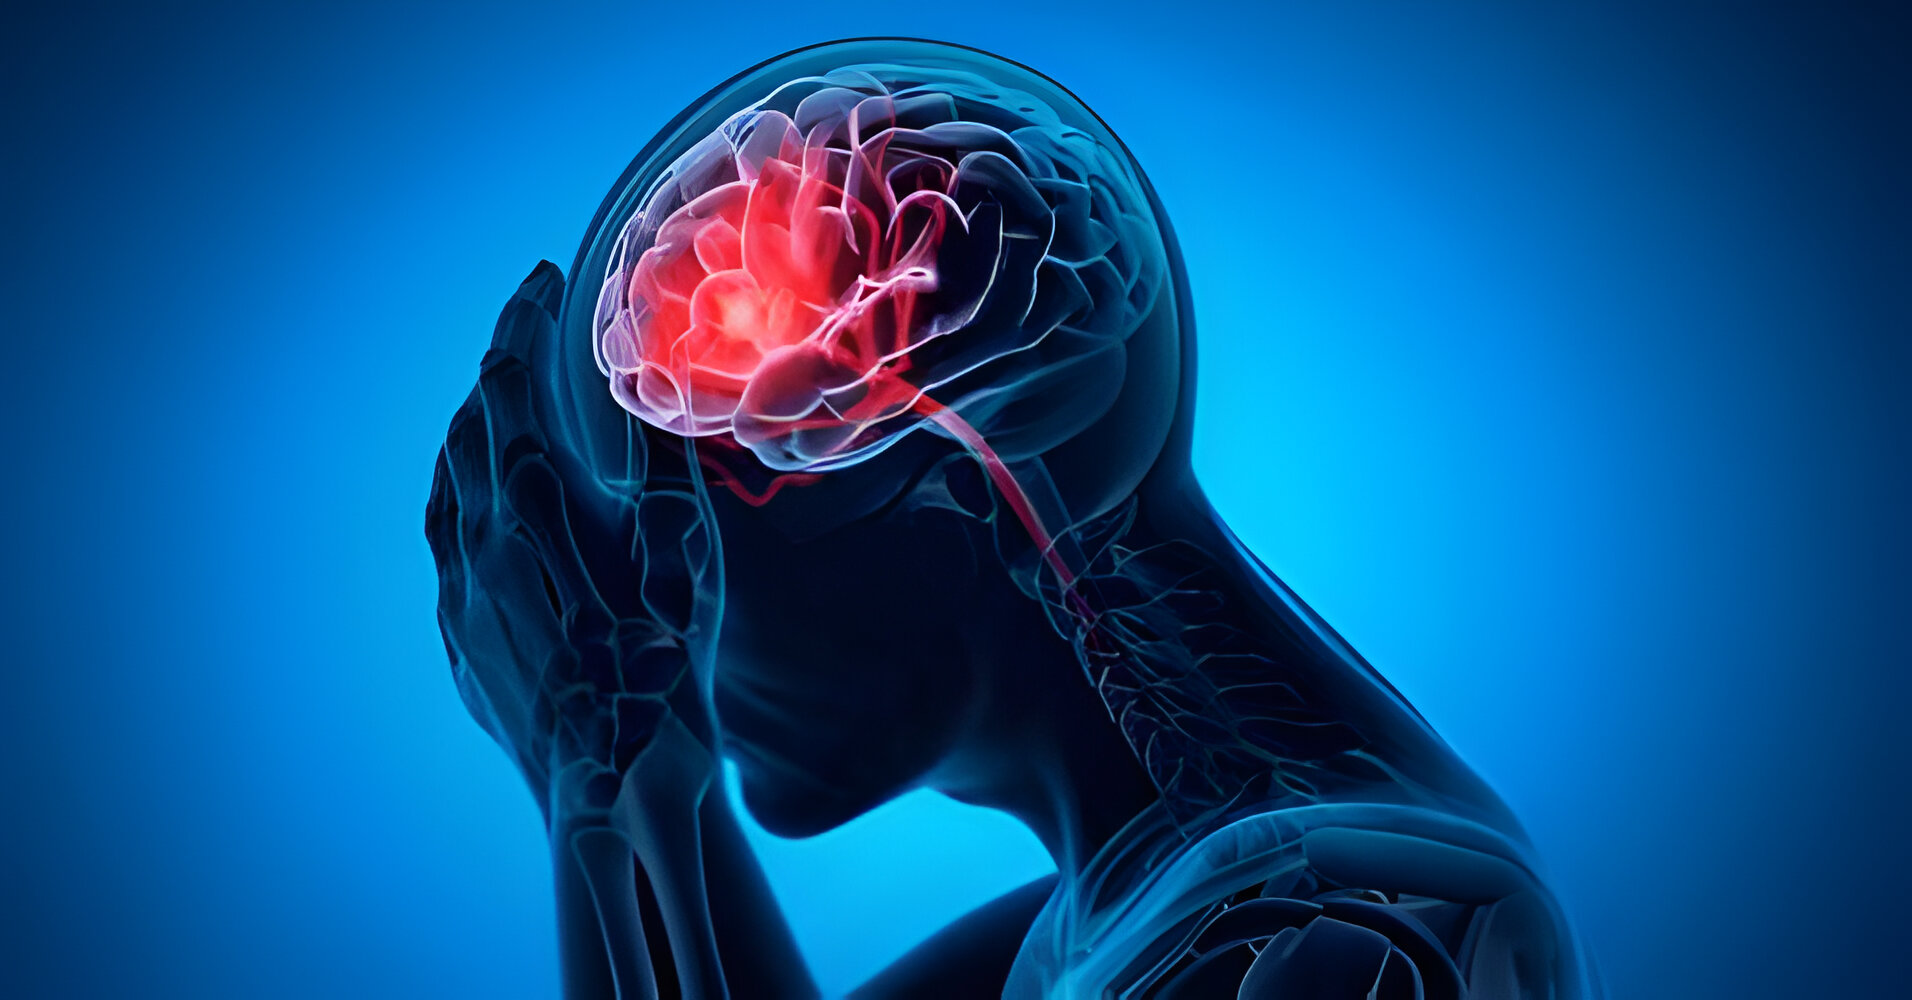 Why Trust Stem Cell Therapy For Treating Brain Damage?